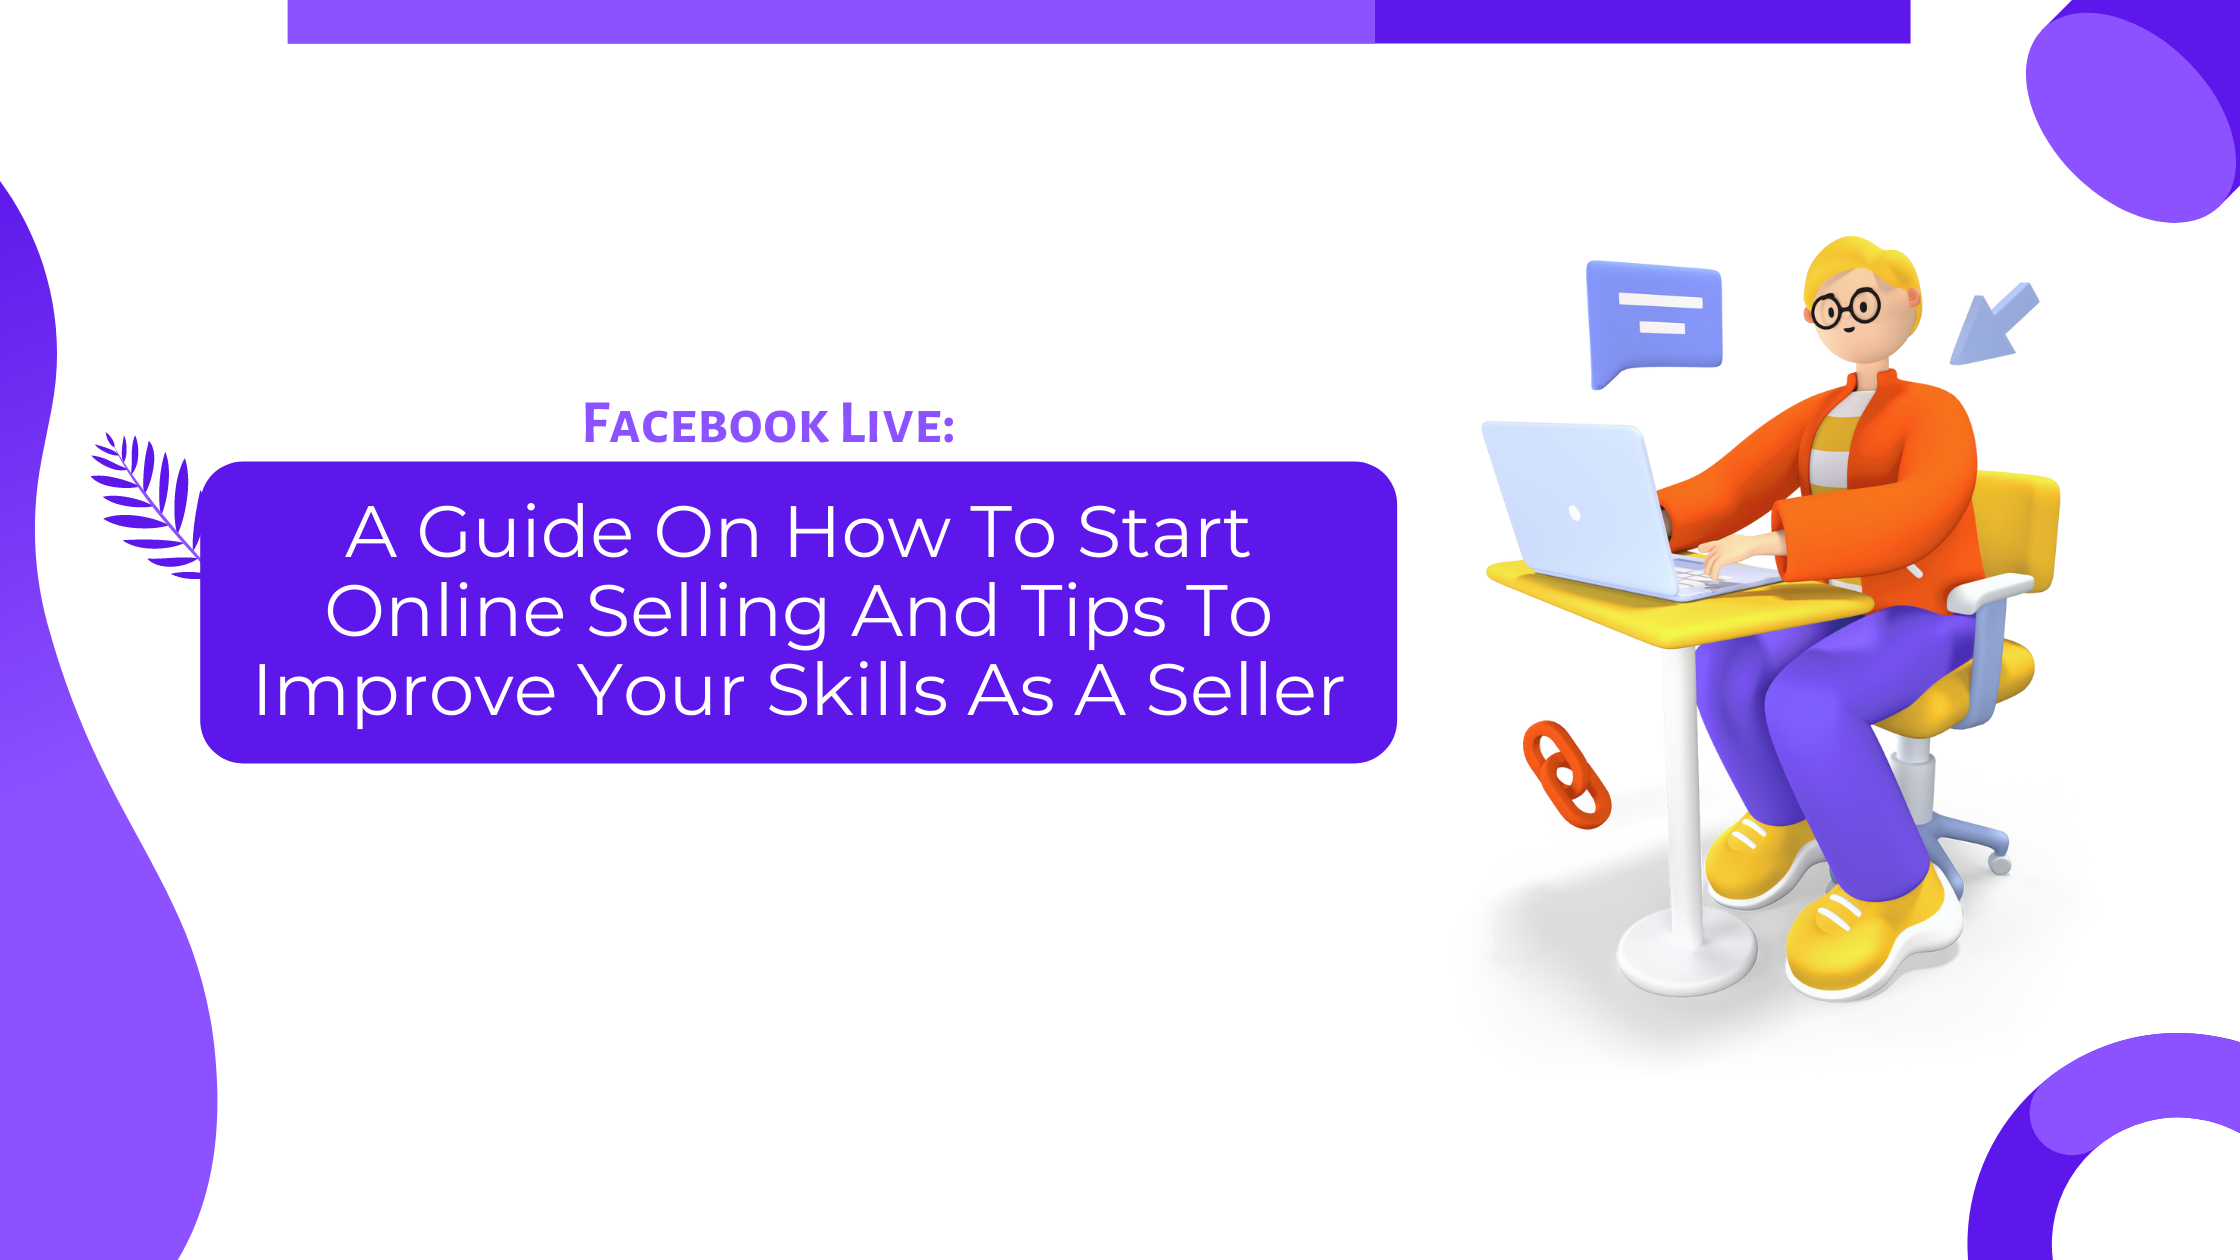 Facebook Live A Guide On How To Start Online Selling And Tips To Improve Your Skills As A Seller